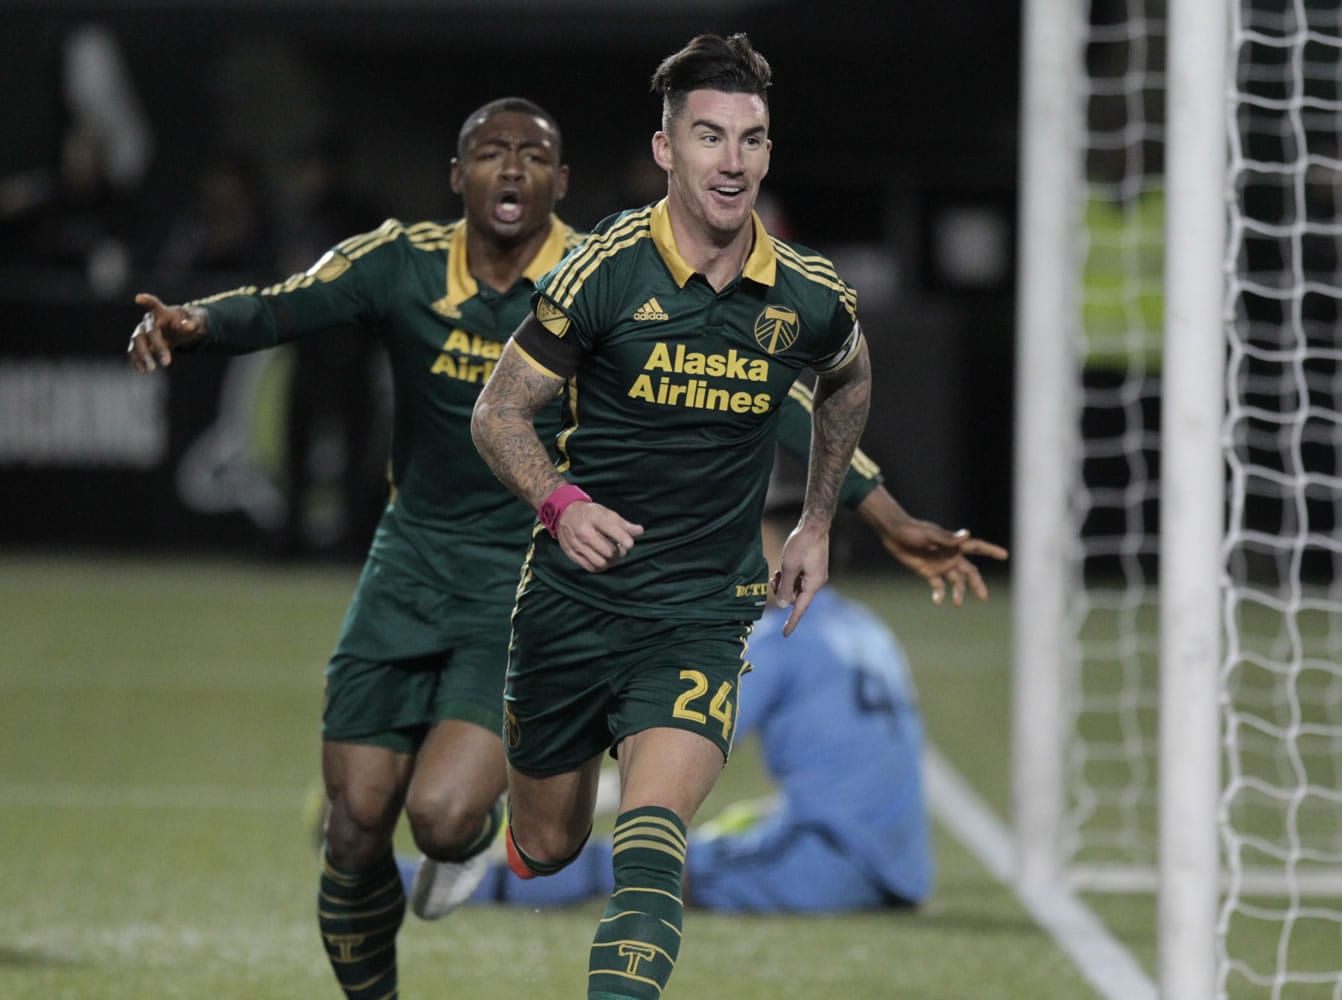 Portland Timbers forward Fanendo Adi (9) and defender Liam Ridgewell (24) celebrate Ridgewell's goal during the first half of the first leg of the MLS soccer Western Conference championship in Portland, Ore., Sunday, Nov. 22, 2015.